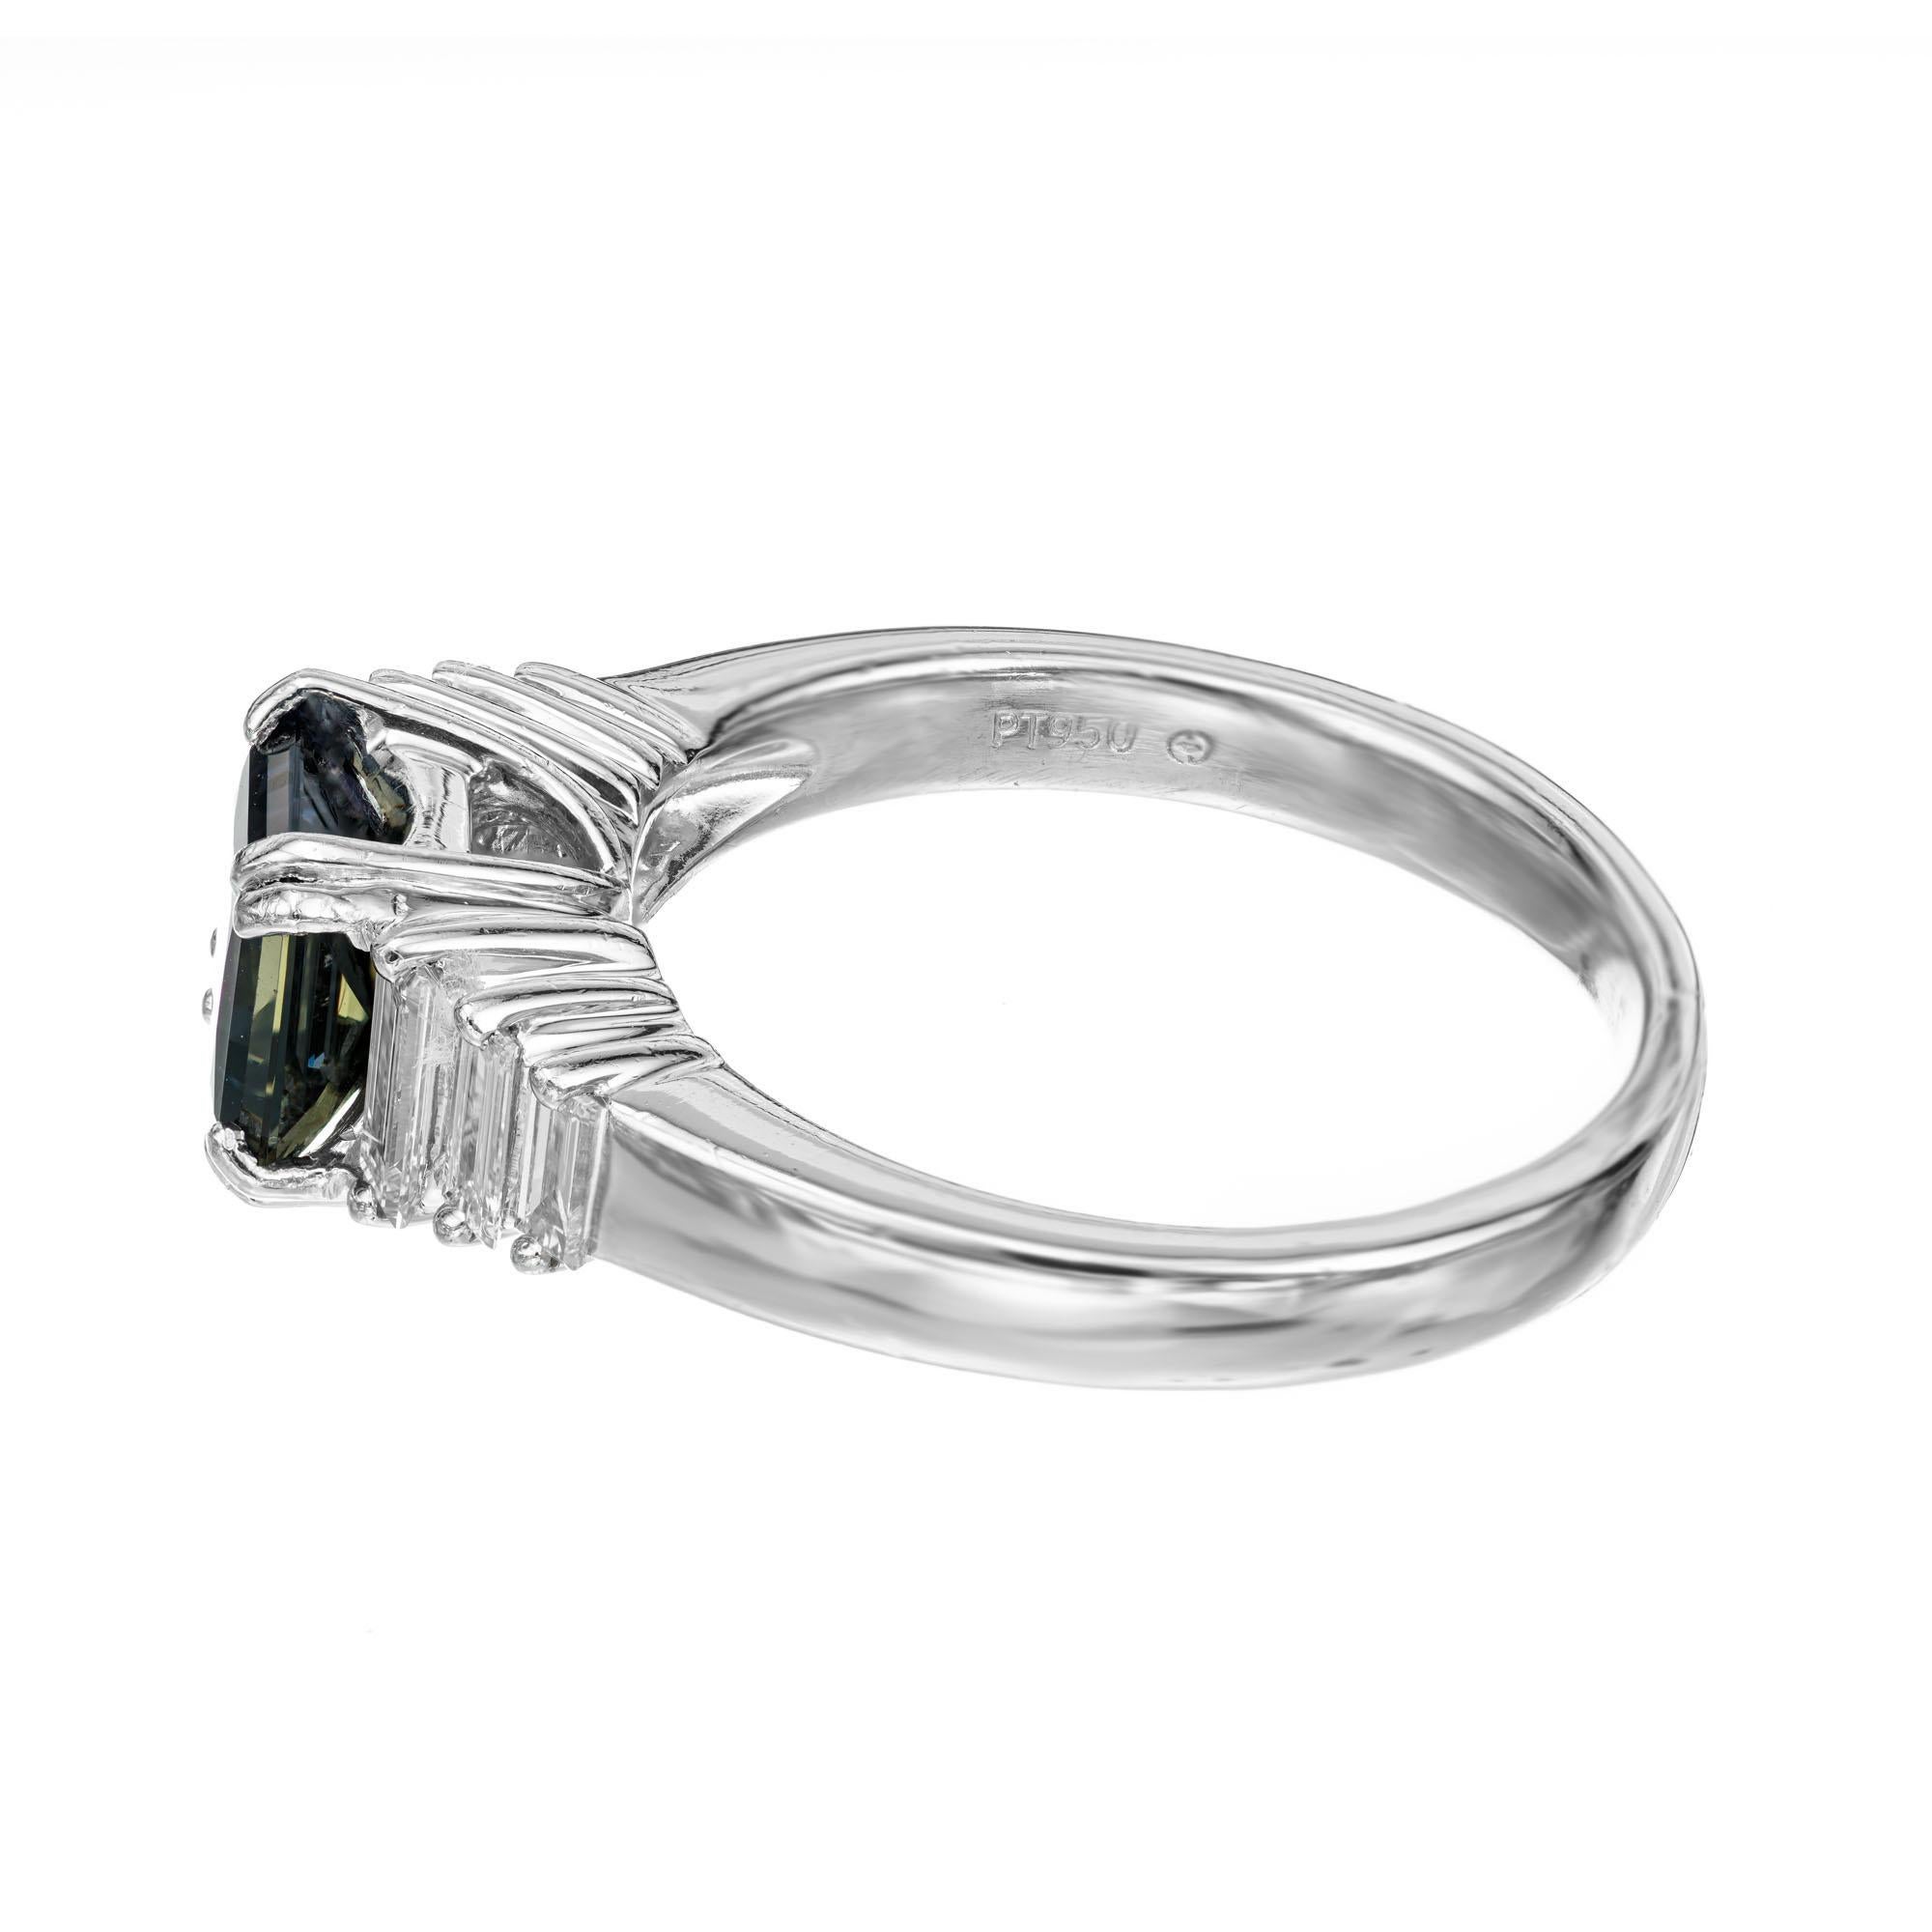 Square Cut AGL Certified Natural 1.41 Carat Green Sapphire Diamond Platinum Engagement Ring For Sale